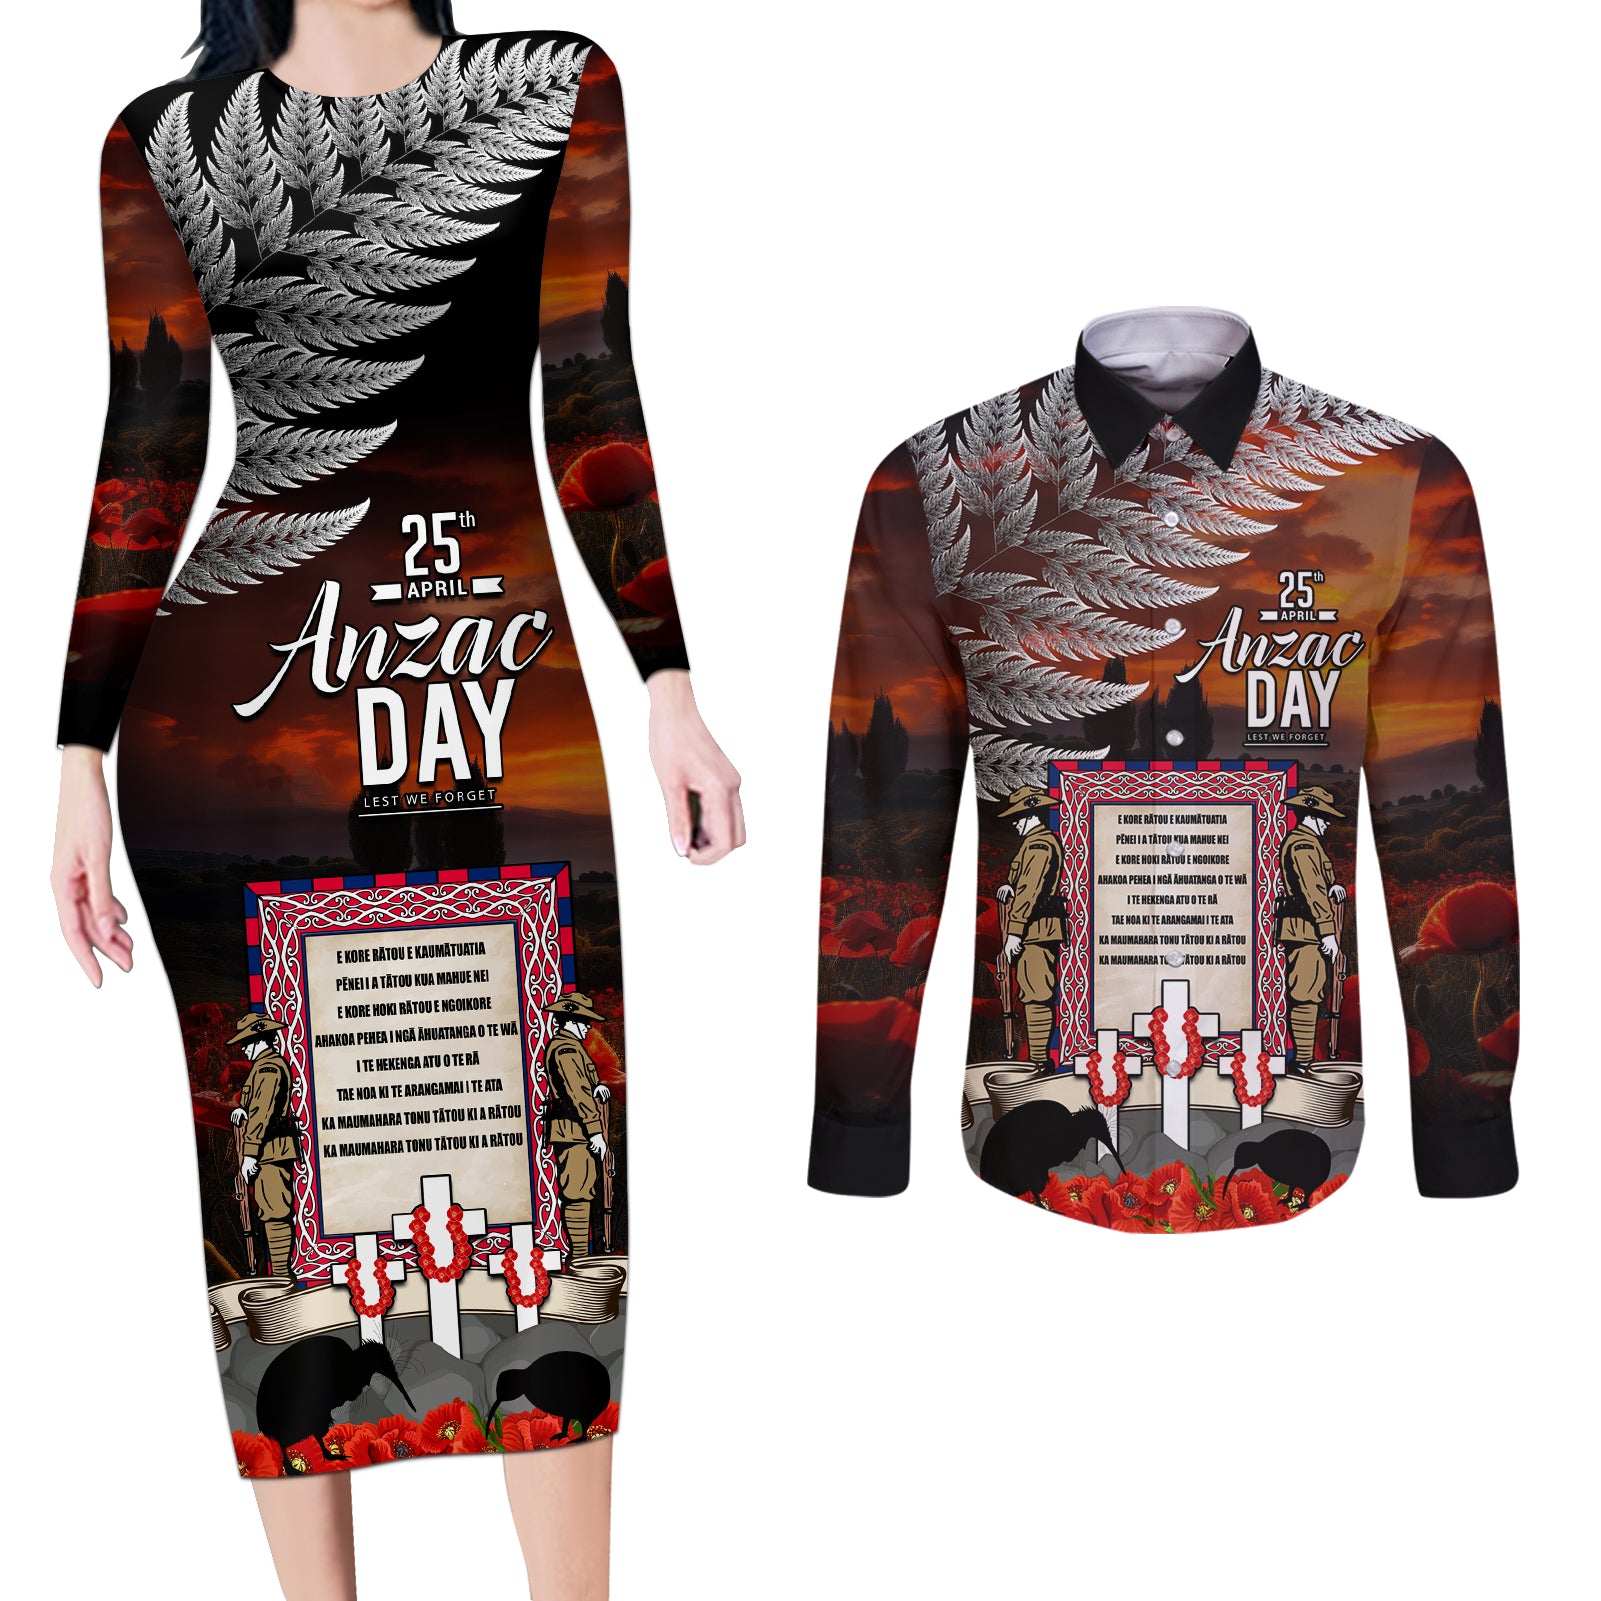 New Zealand ANZAC Day Couples Matching Long Sleeve Bodycon Dress and Long Sleeve Button Shirt The Ode of Remembrance and Silver Fern